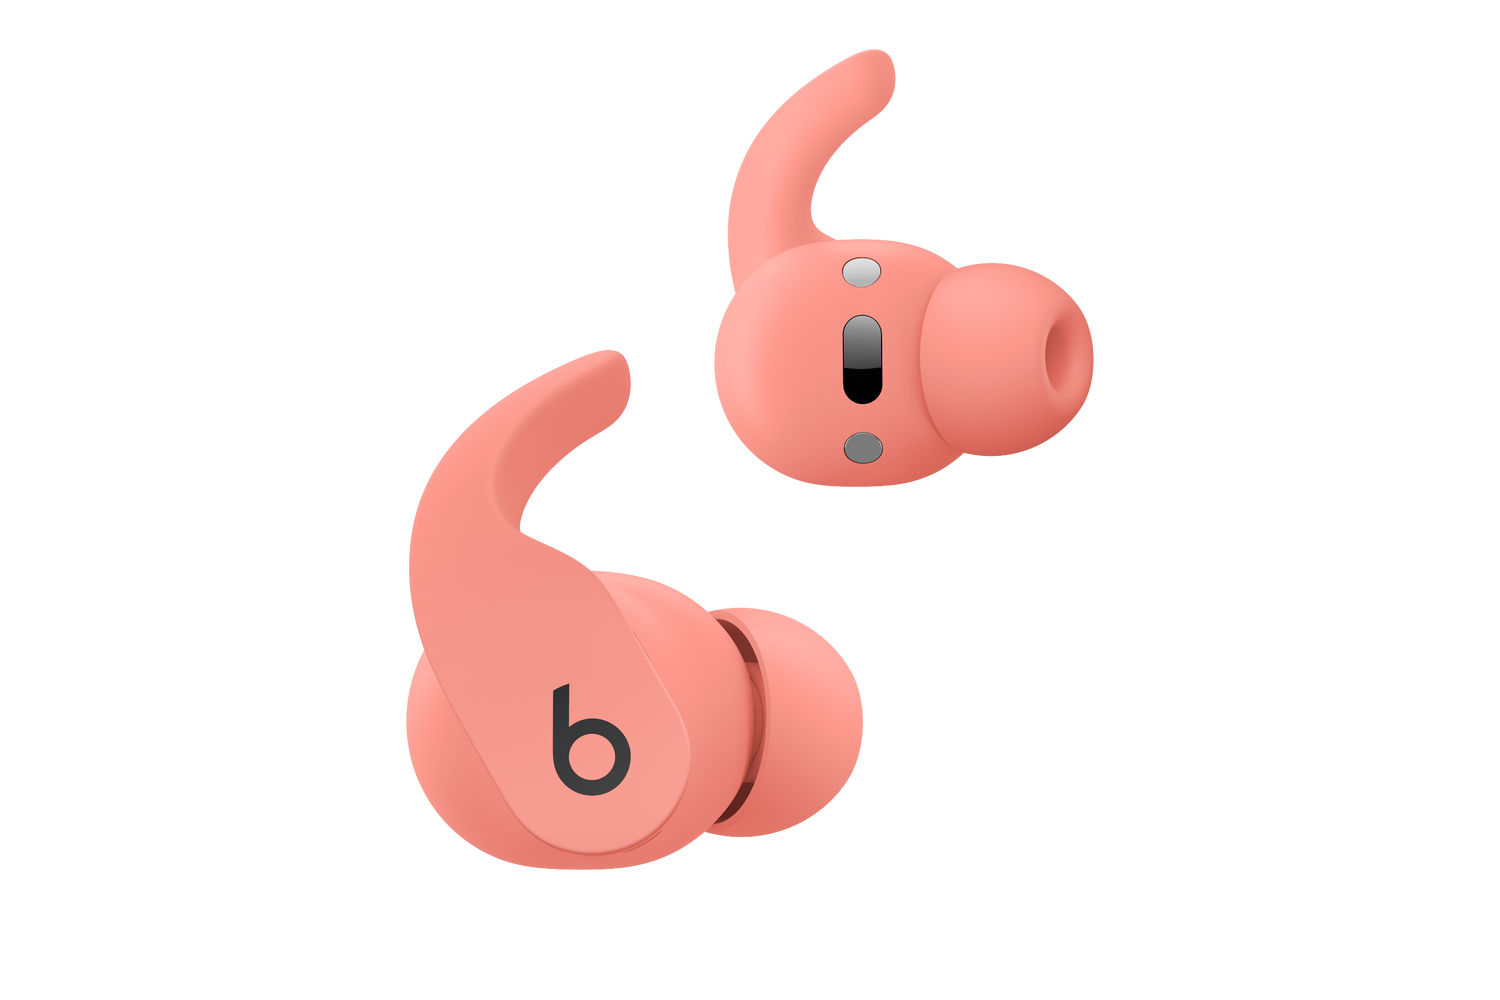 Beats Fit Pro True Wireless Earbuds - Coral Pink